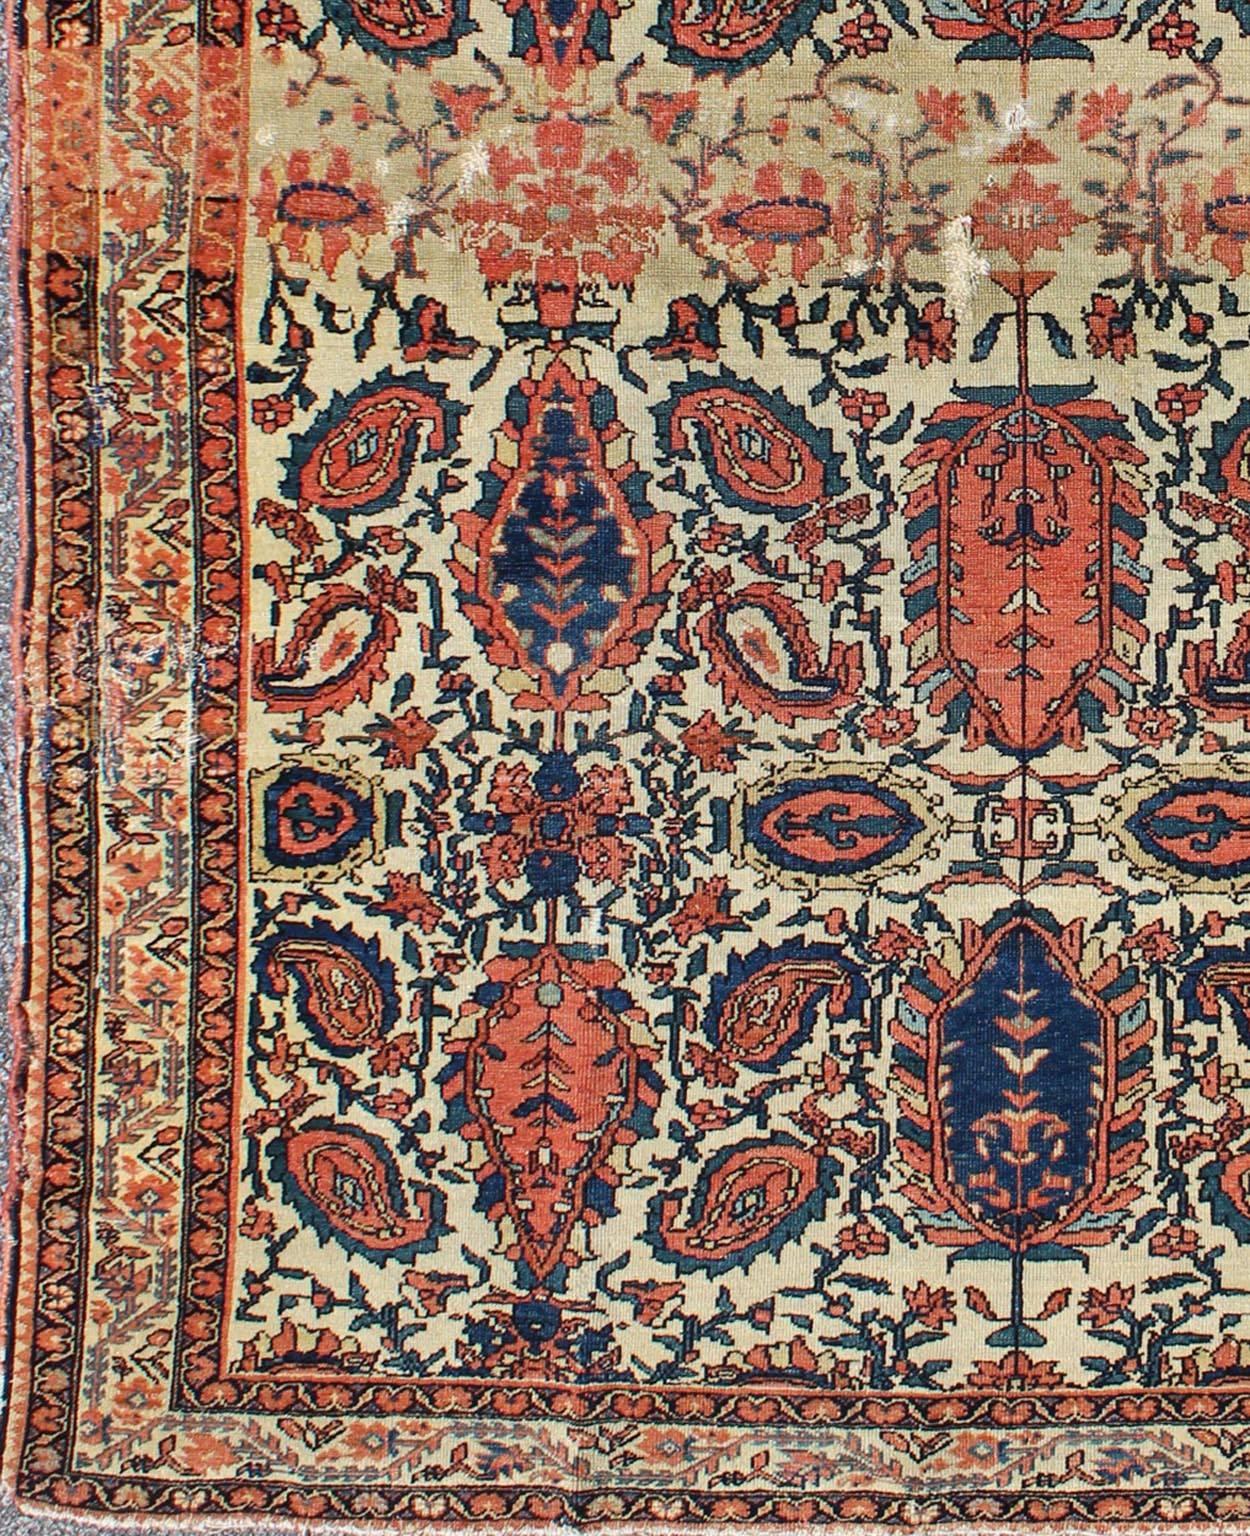 Paisley design antique Persian Malayer rug in ivory, red, blue,  brown, rug 18-0407, country of origin / type: Iran / Malayer, circa 1900.

This beautiful antique early 20th century Persian Malayer carpet features an all-over design of repeating